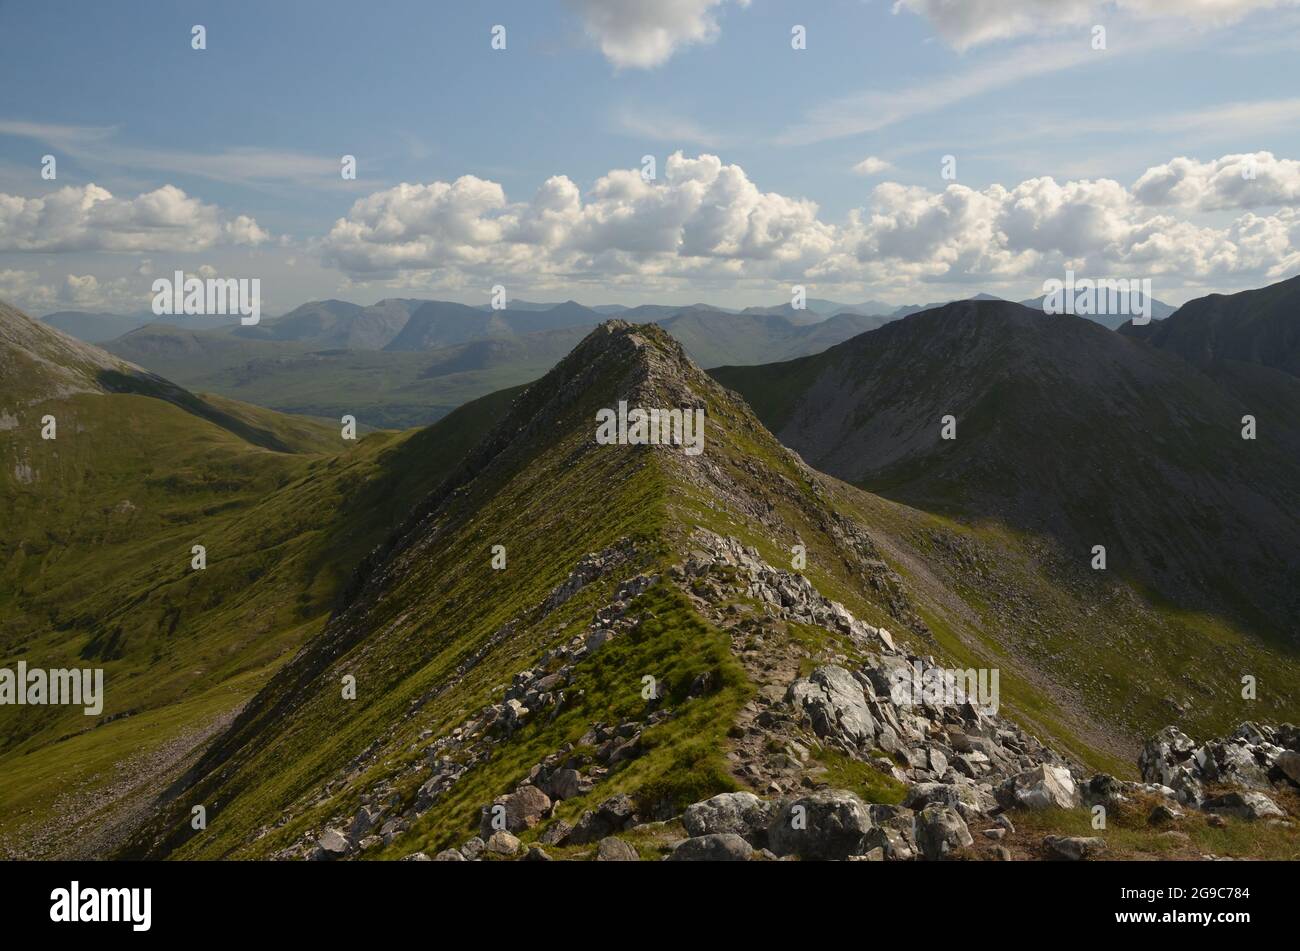 The ridge between the mountains An Gearanach and An Garbhanach, part of the circuit known as the 'Ring of Steall' in the Scottish Highlands, UK. Stock Photo